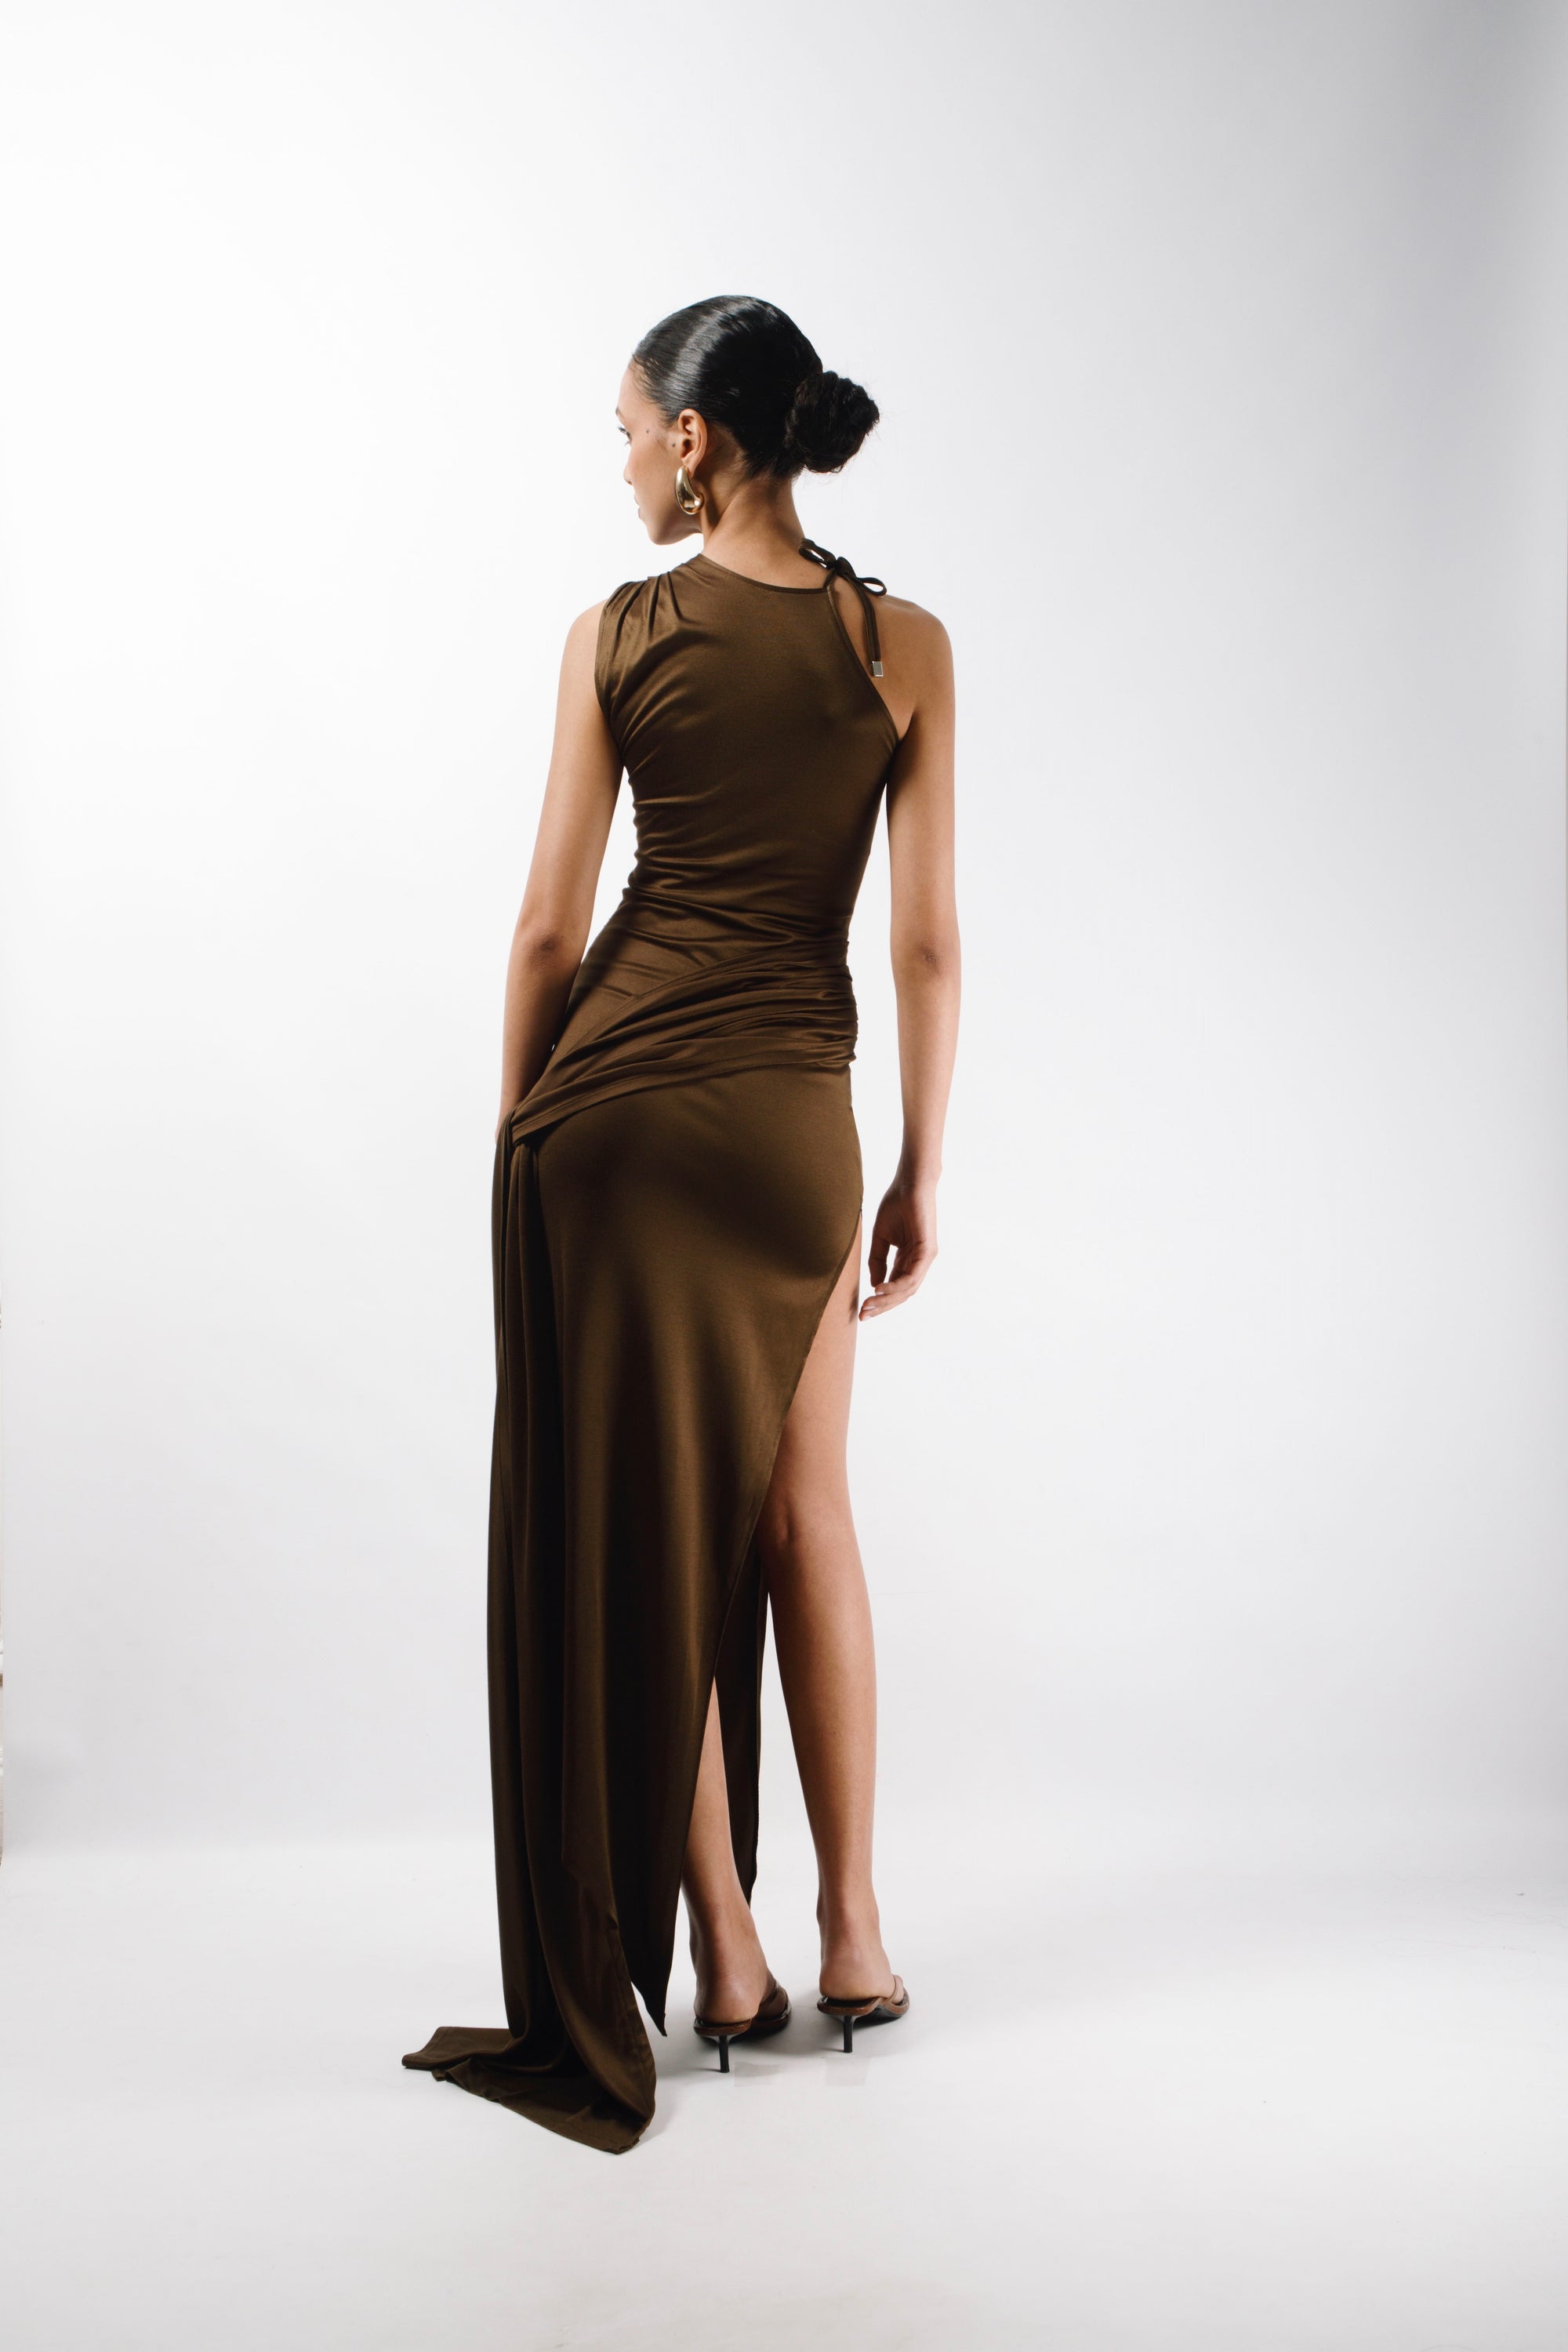 Long Asymmetric Dress in brown Gold Silk fabric with a pleated sleeve and an adjustable sleeve, the Dress features a long train attached from the waist and an opening slit that hits at the ankle - back